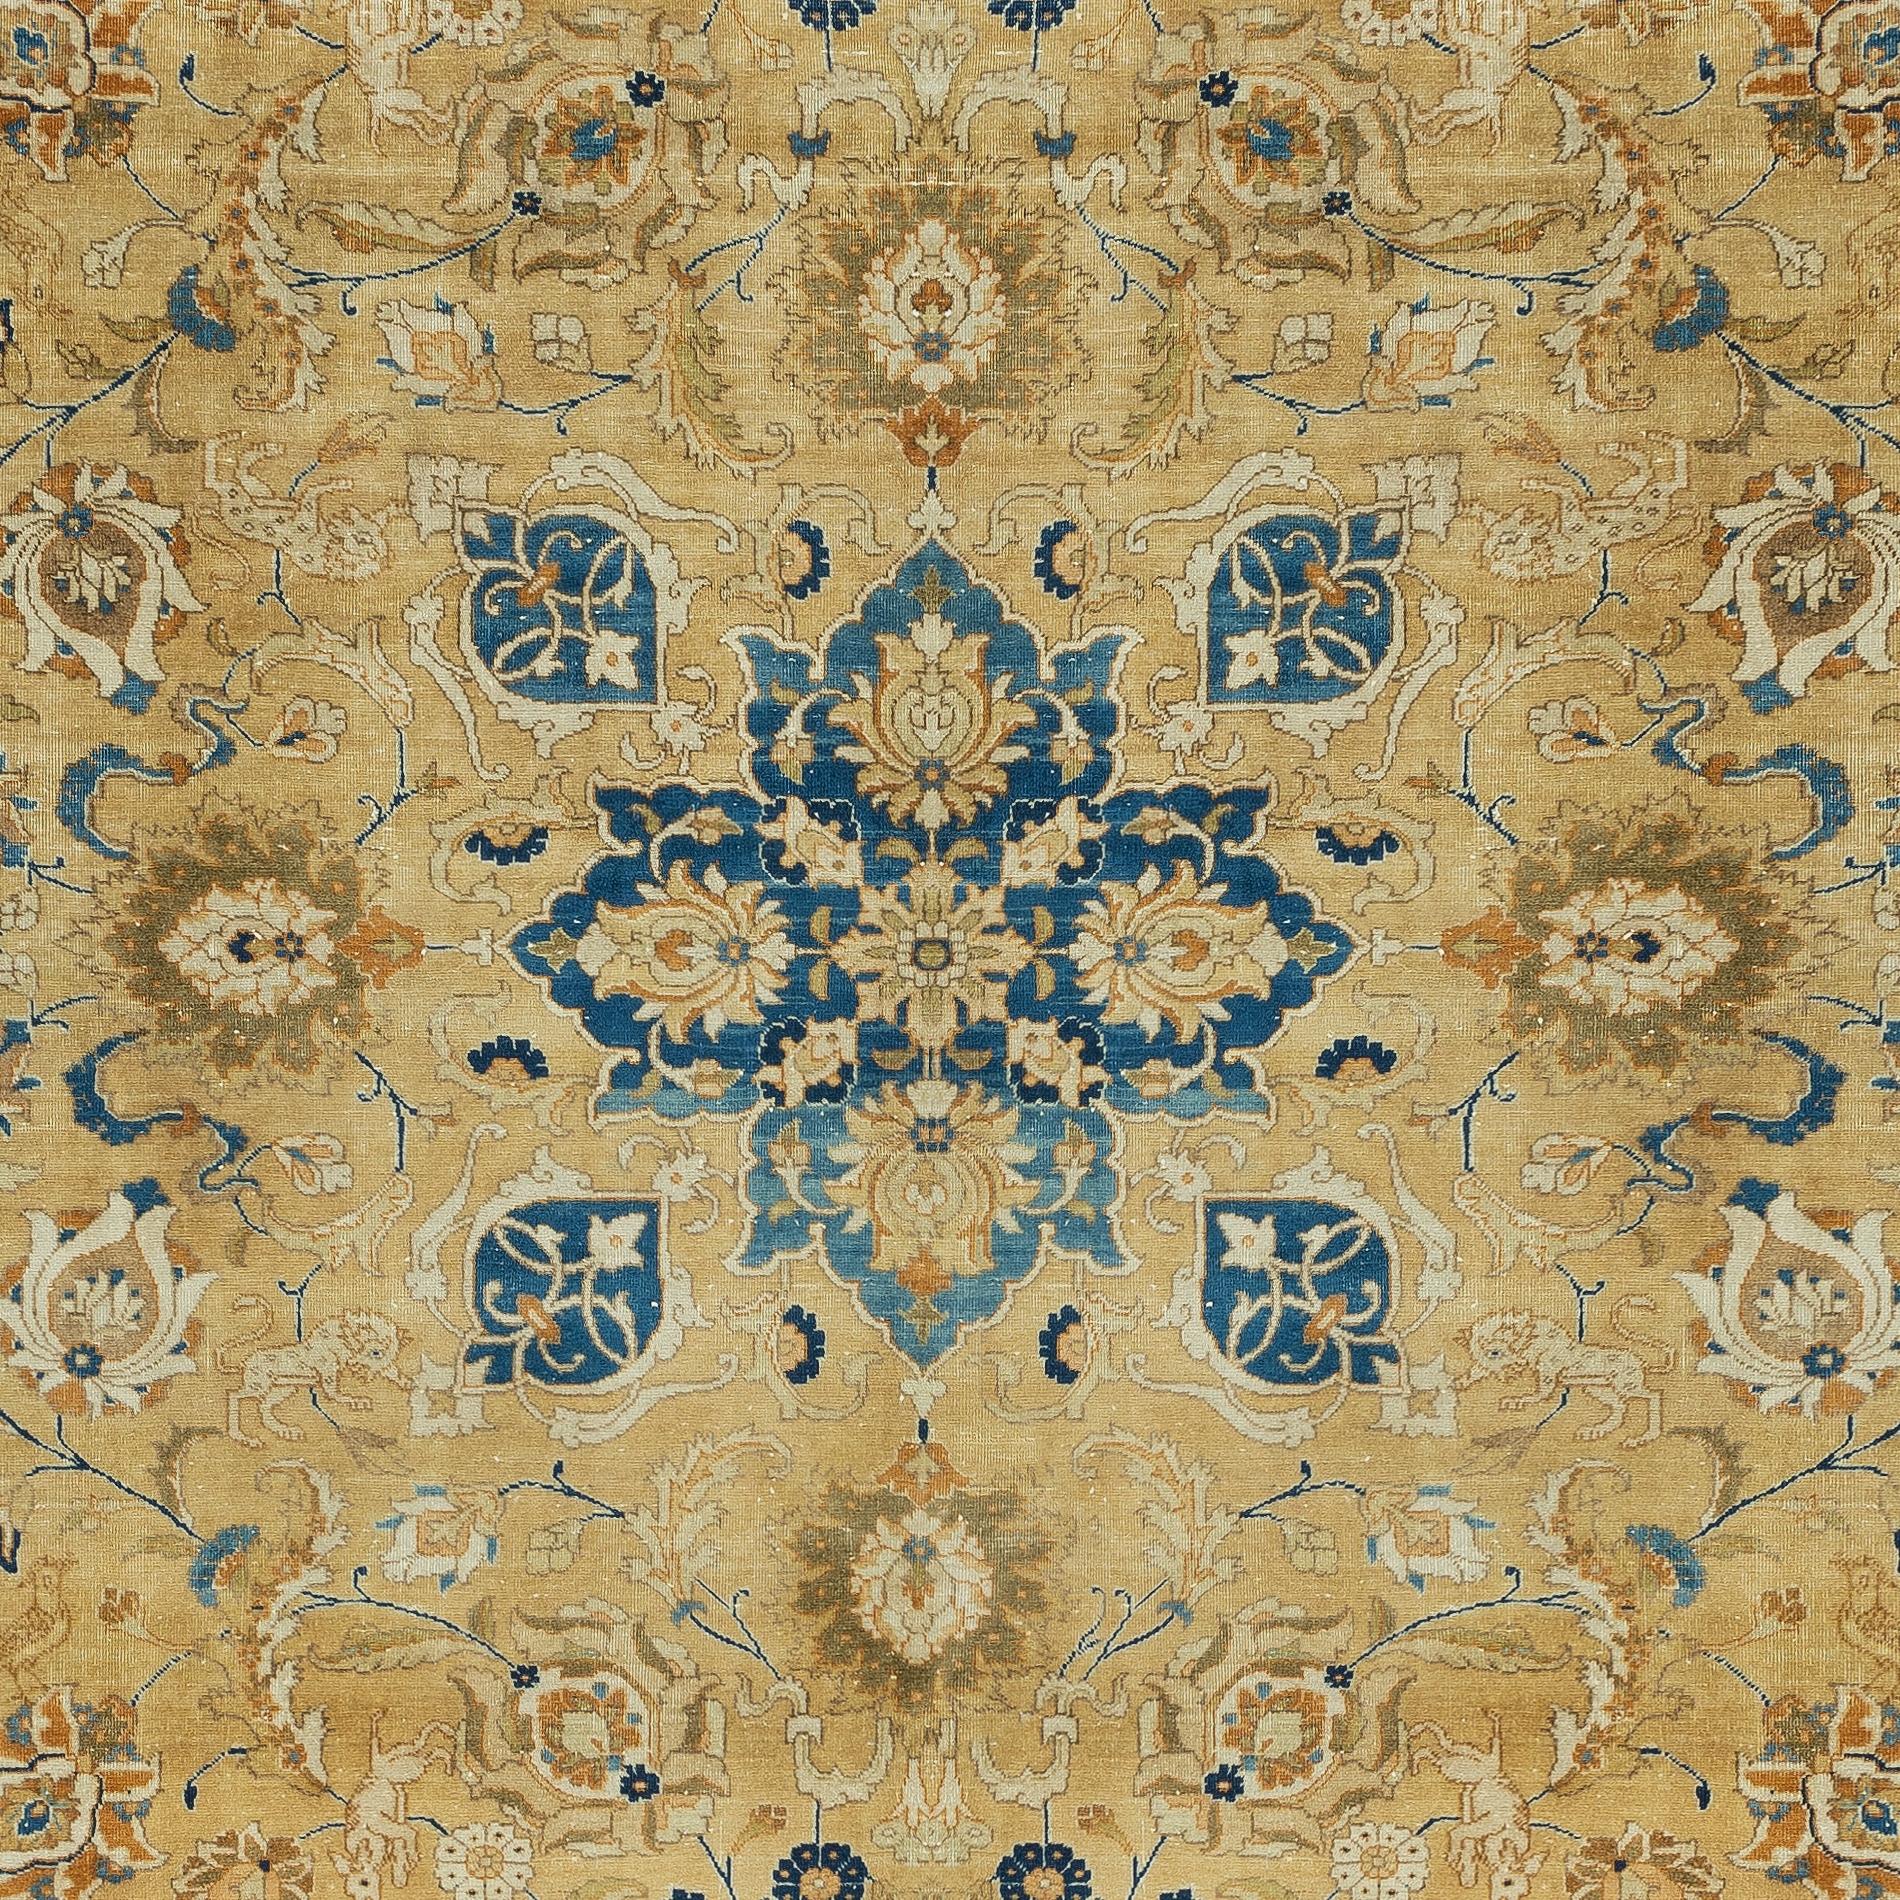 Hand-Woven 8x11 Ft Modern Handmade Area Rug in Beige & Blue, Floral Pattern Turkish Carpet For Sale